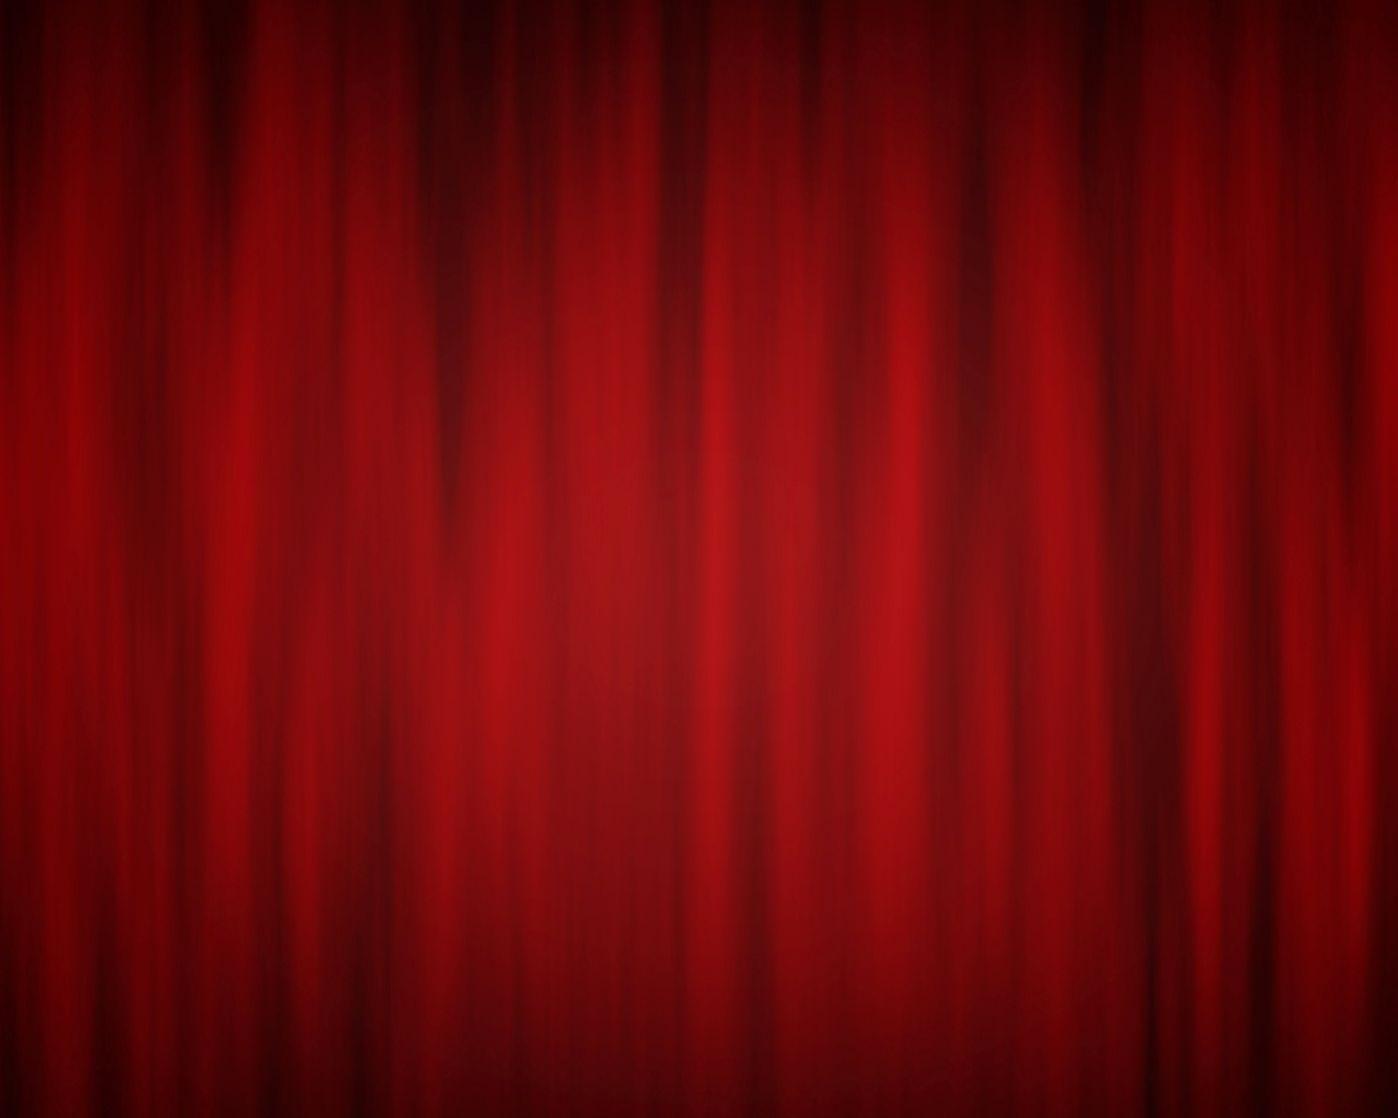 Wallpaper For > Red And Black Background Image